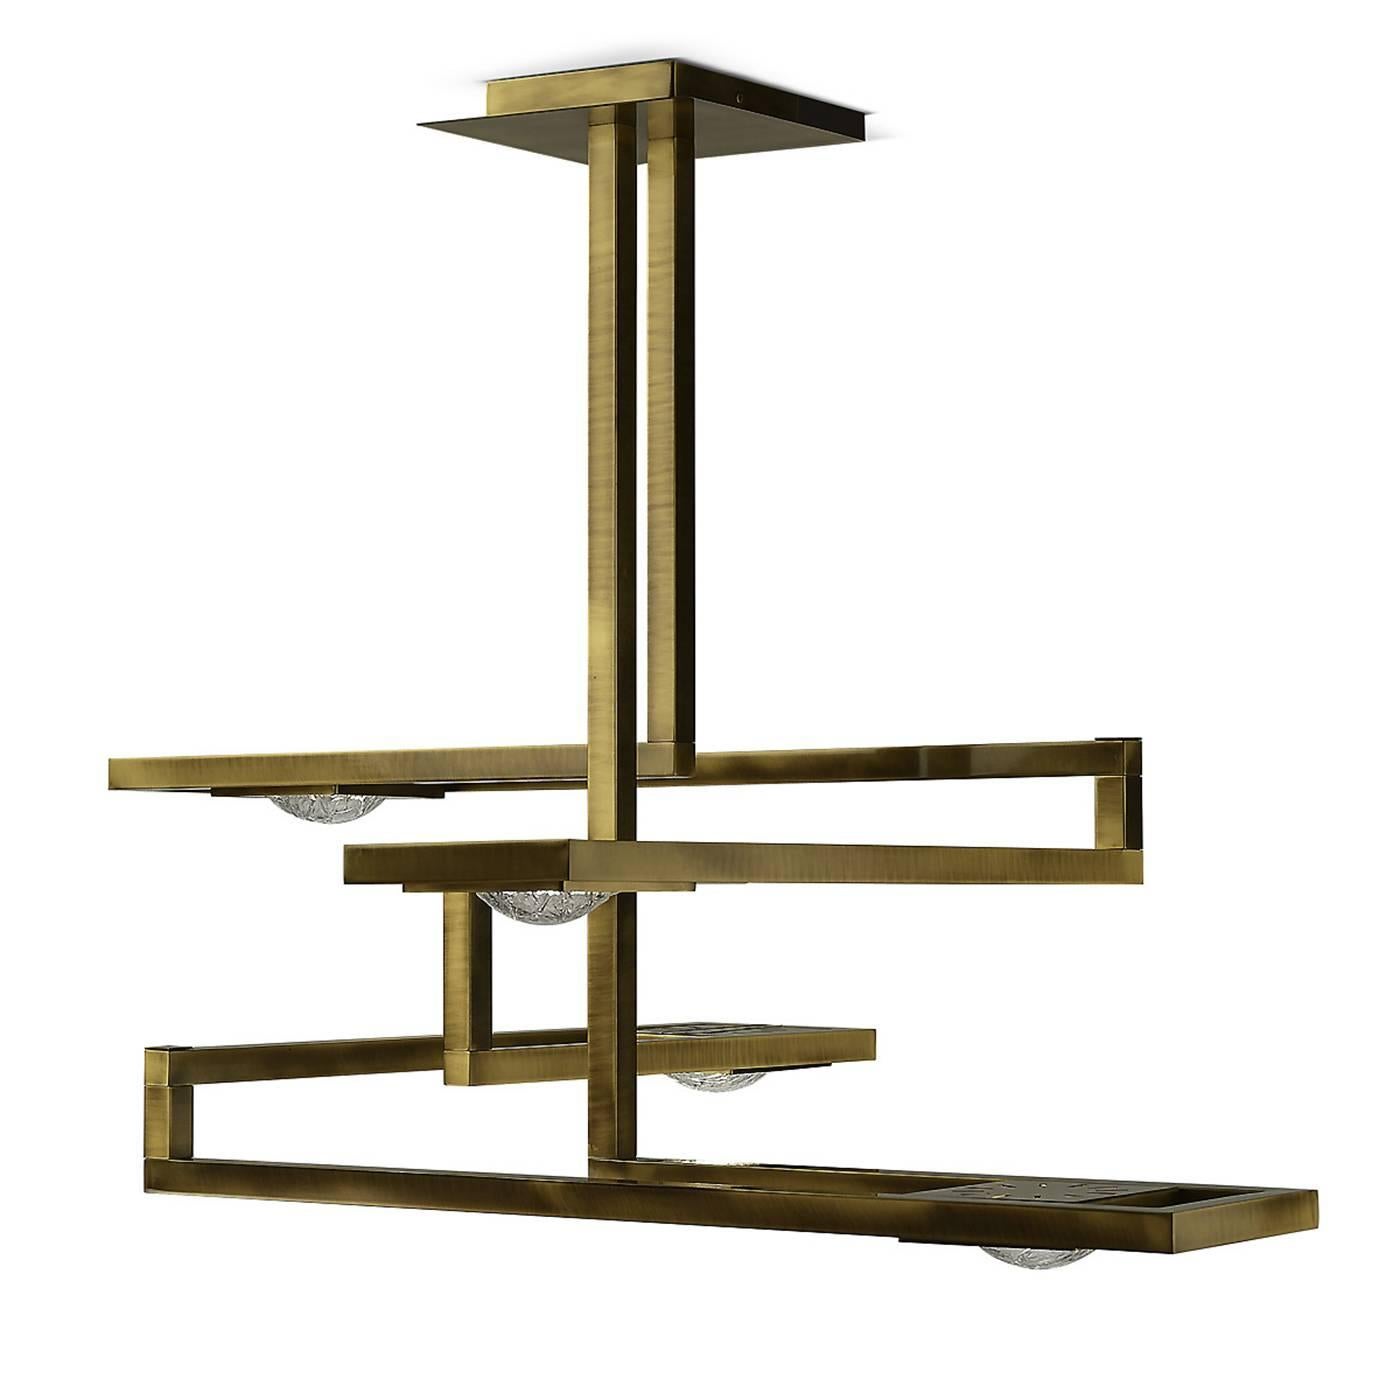 This stunning ceiling lamp is made entirely of brass with a square base attached to the ceiling from which two vertical elements stem, creating a series of legs positioned at different heights in the shape of a rectangle. At the edges of each arm, a